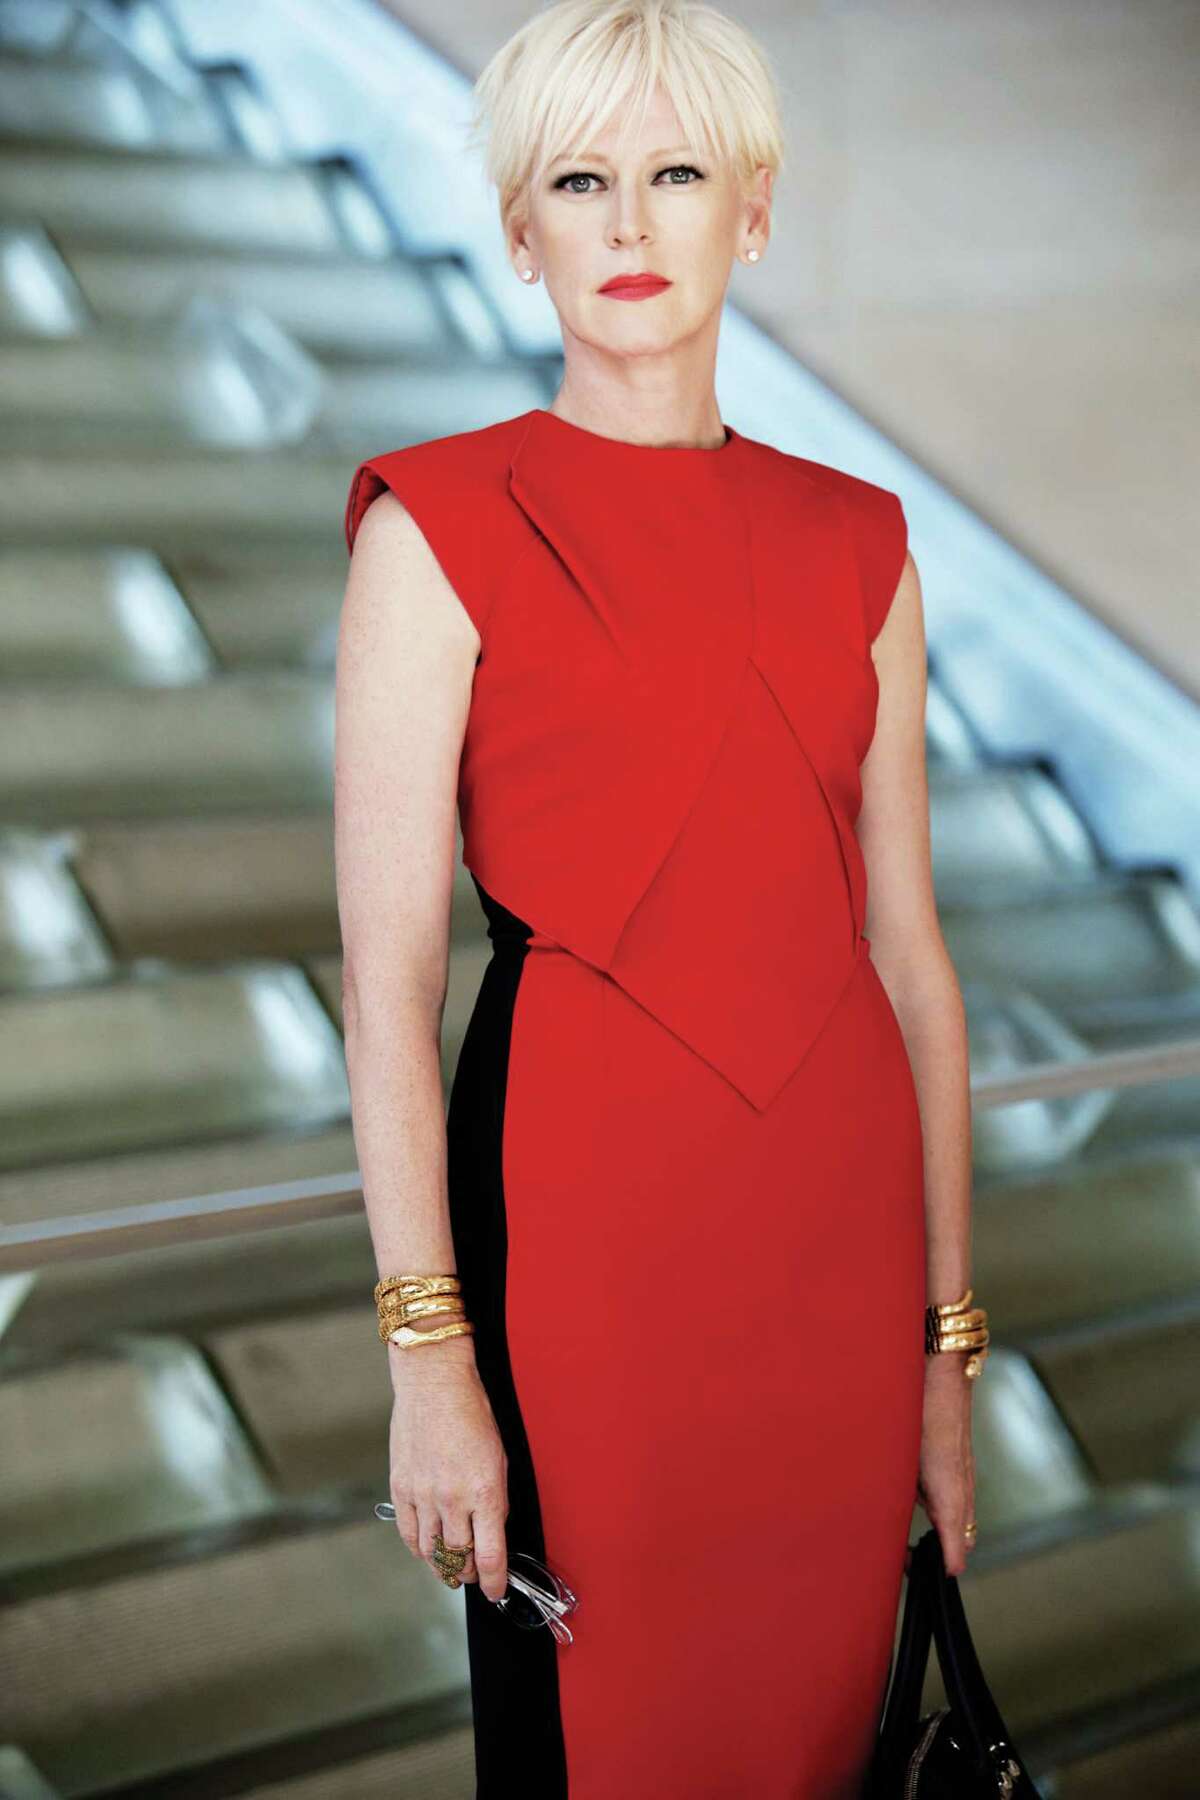 Joanna Coles, the editor-in-chief of Cosmopolitan magazine, will be the keynote speaker at the Third Annual Women Entrepreneurs Empowerment Forum on Friday, Sept. 18, at the University of Connecticut Stamford Campus. Coles was named editor-in-chief of Cosmopolitan in September 2012.